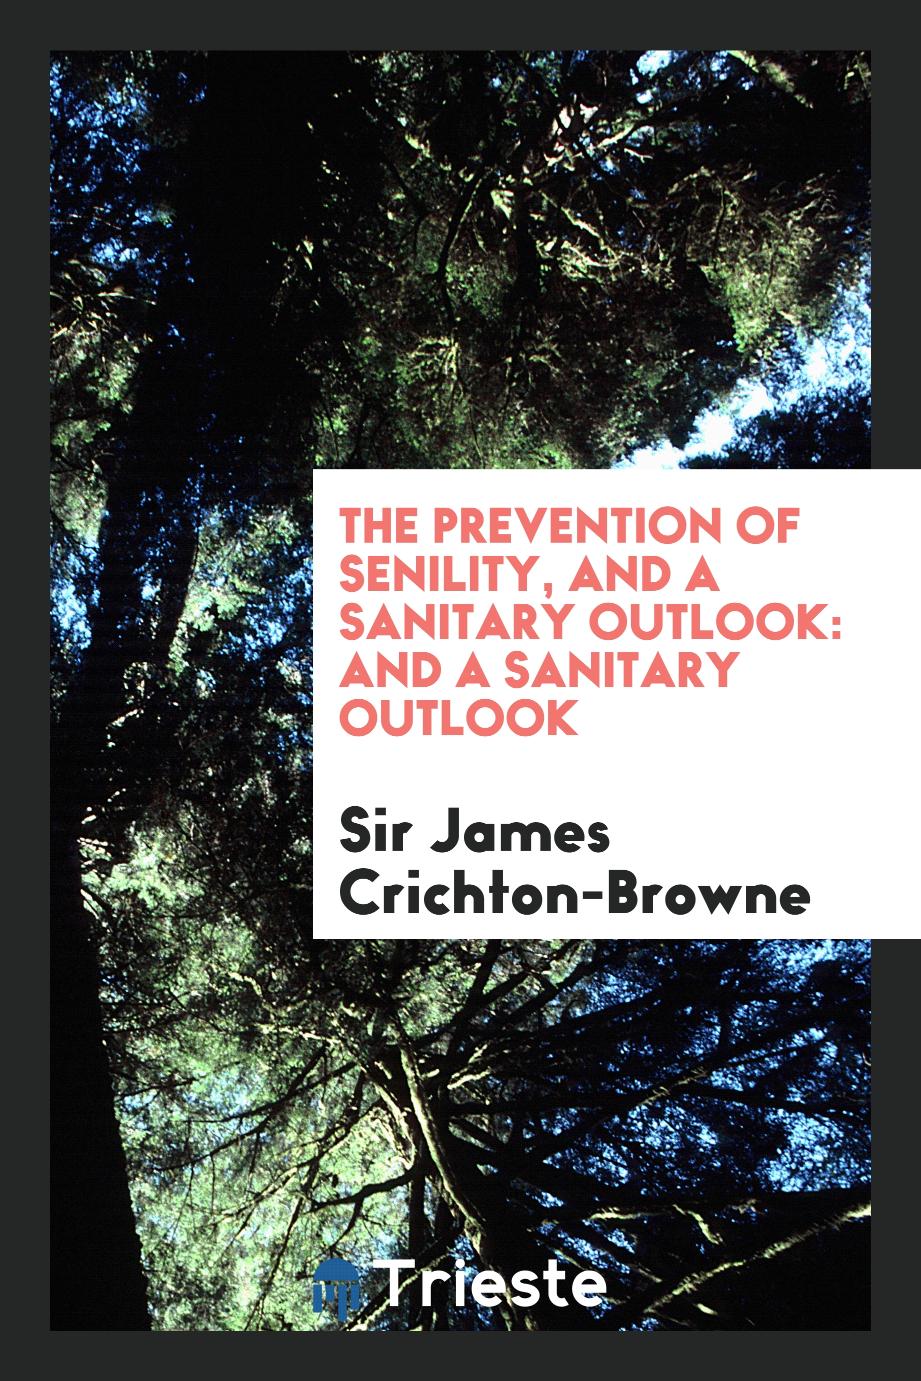 The Prevention of Senility, and a Sanitary Outlook: And a Sanitary Outlook